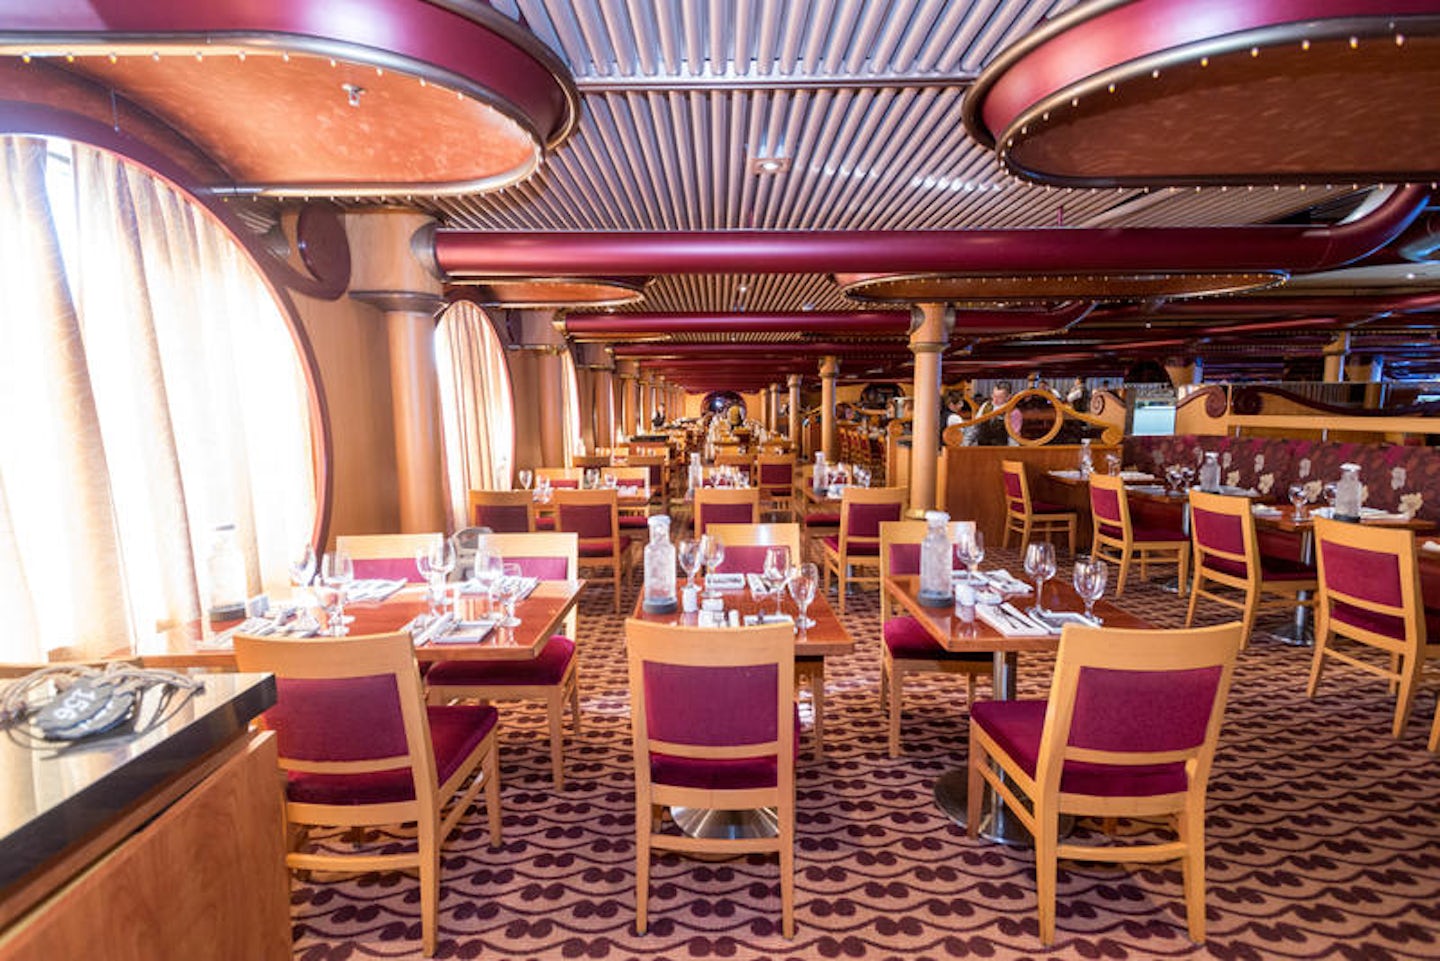 carnival paradise dining room